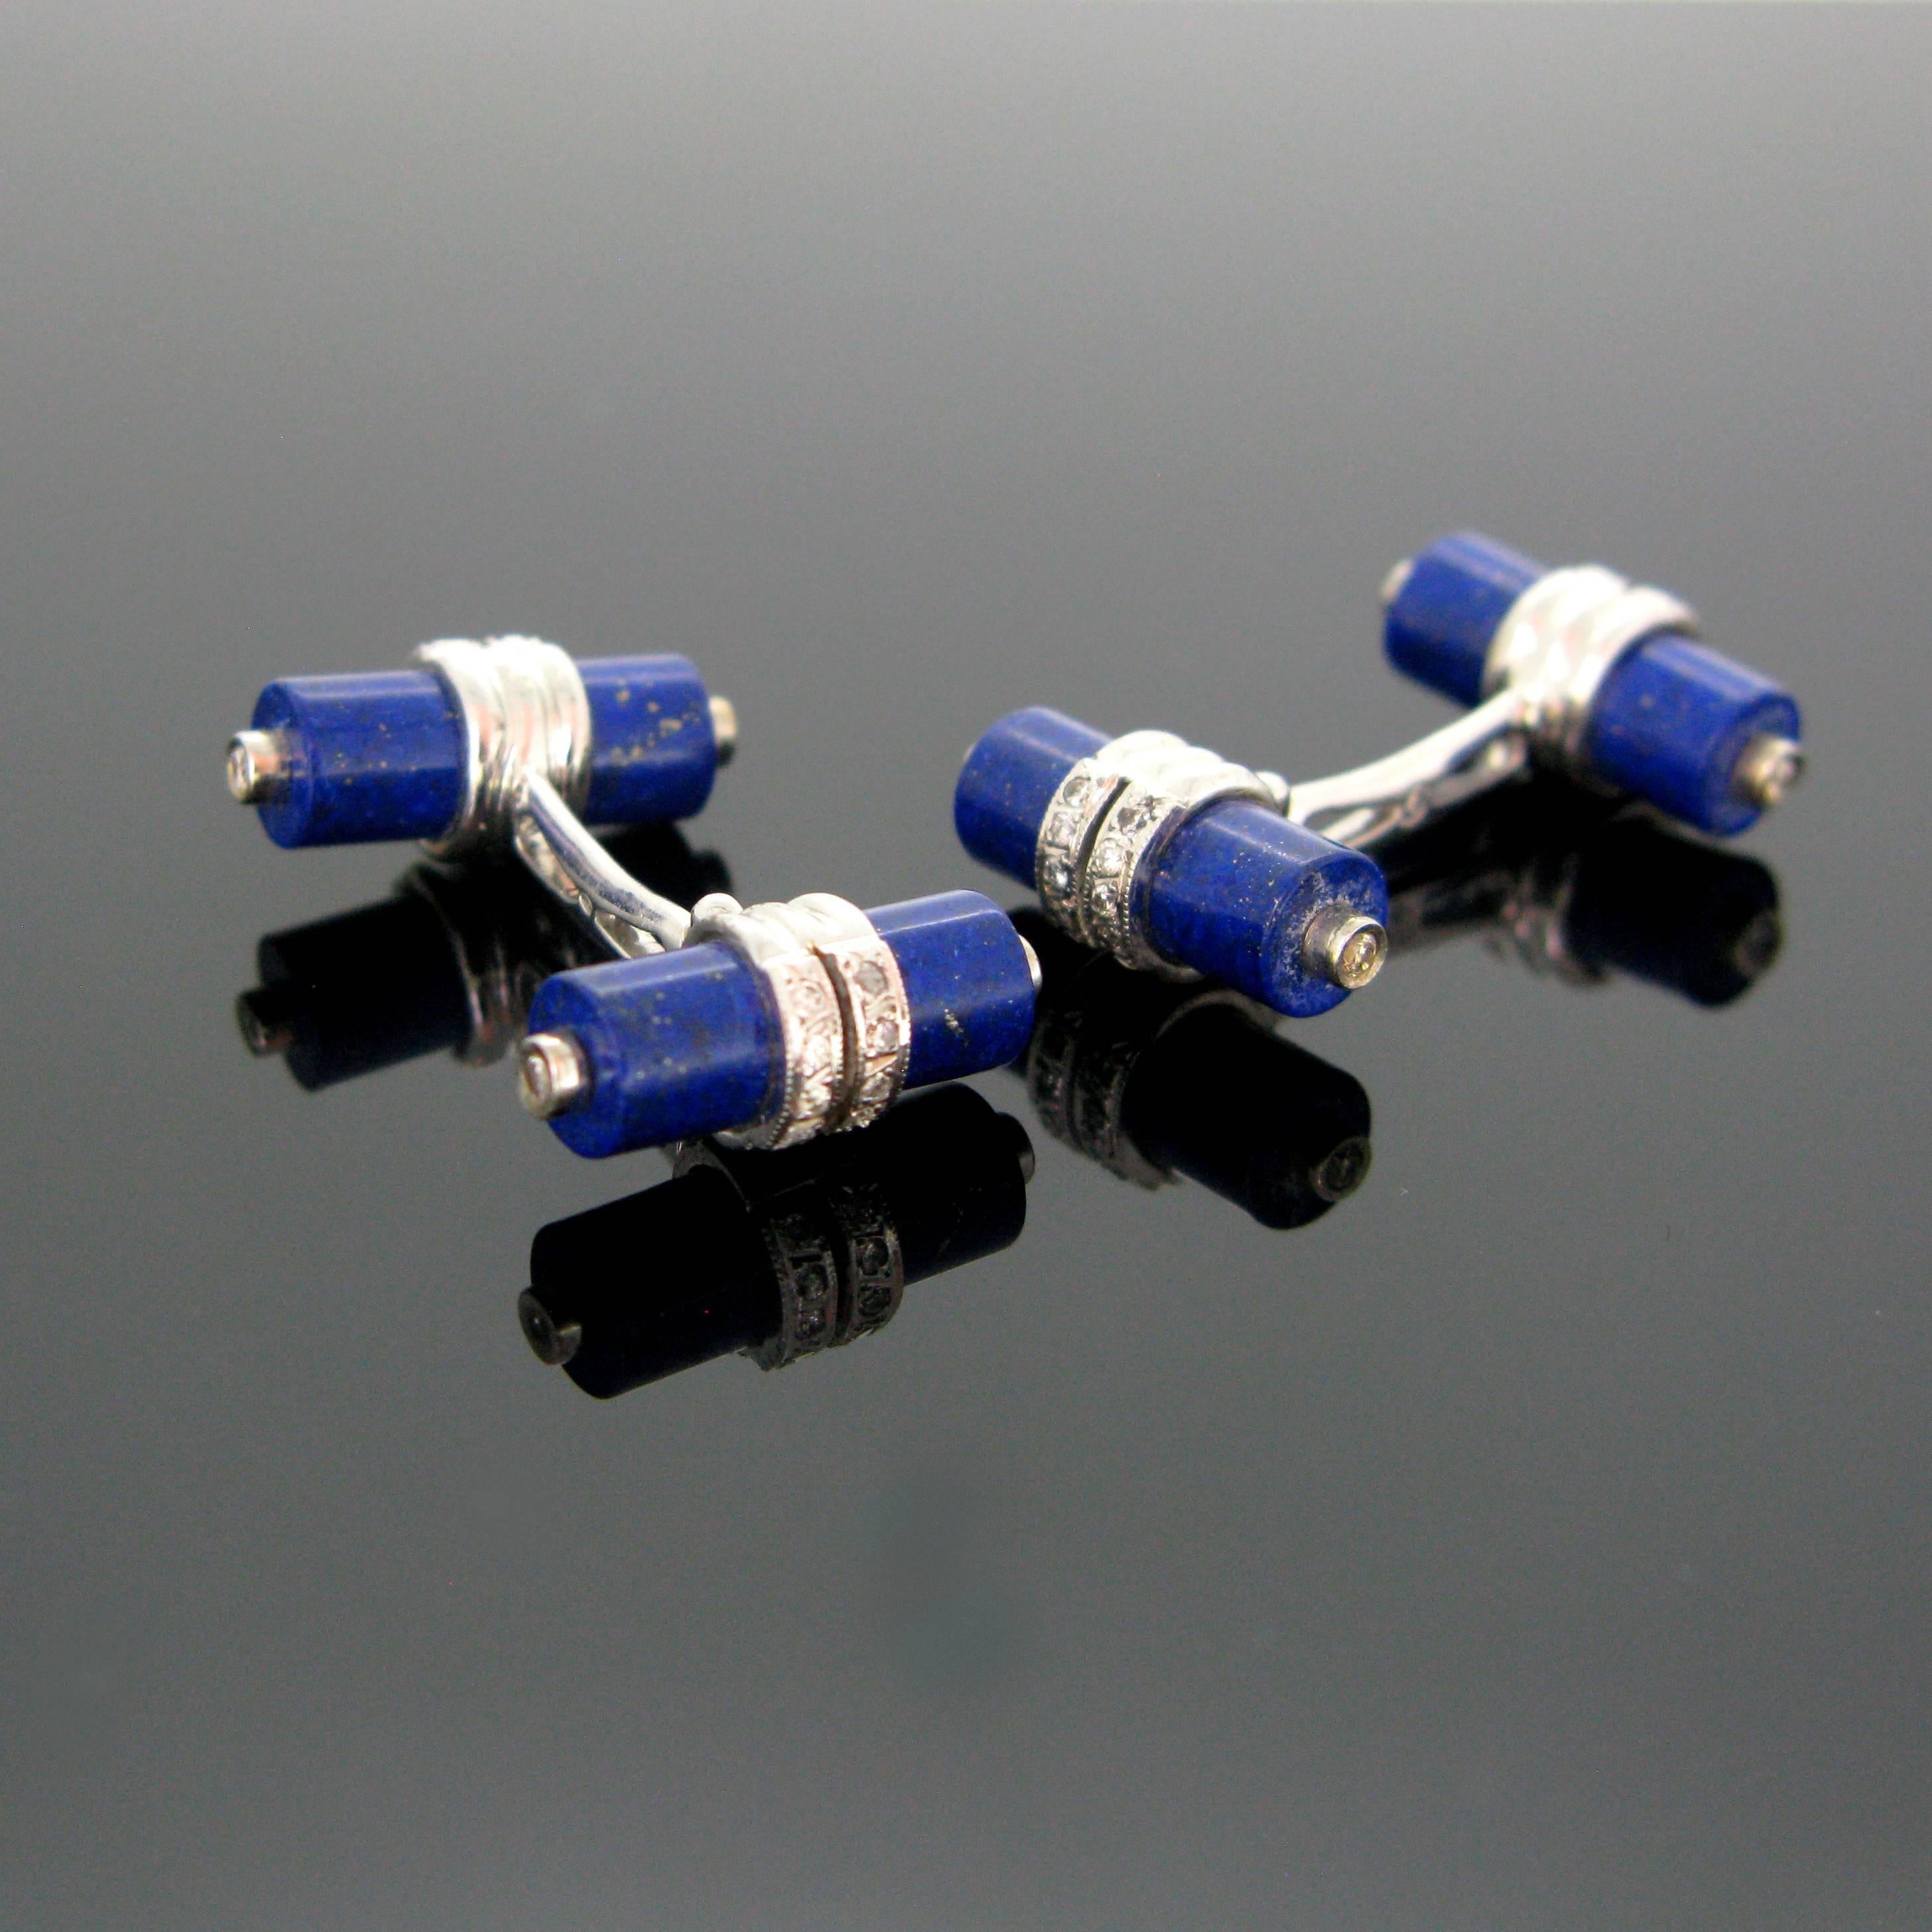 This pair of cufflinks is made in 18kt white gold. Each cufflink consists of 2 cylinder shaped lapis lazuli and the white gold is set with diamonds. There are 40 small diamonds in total at both end of the lapis lazuli cylinders and around – the